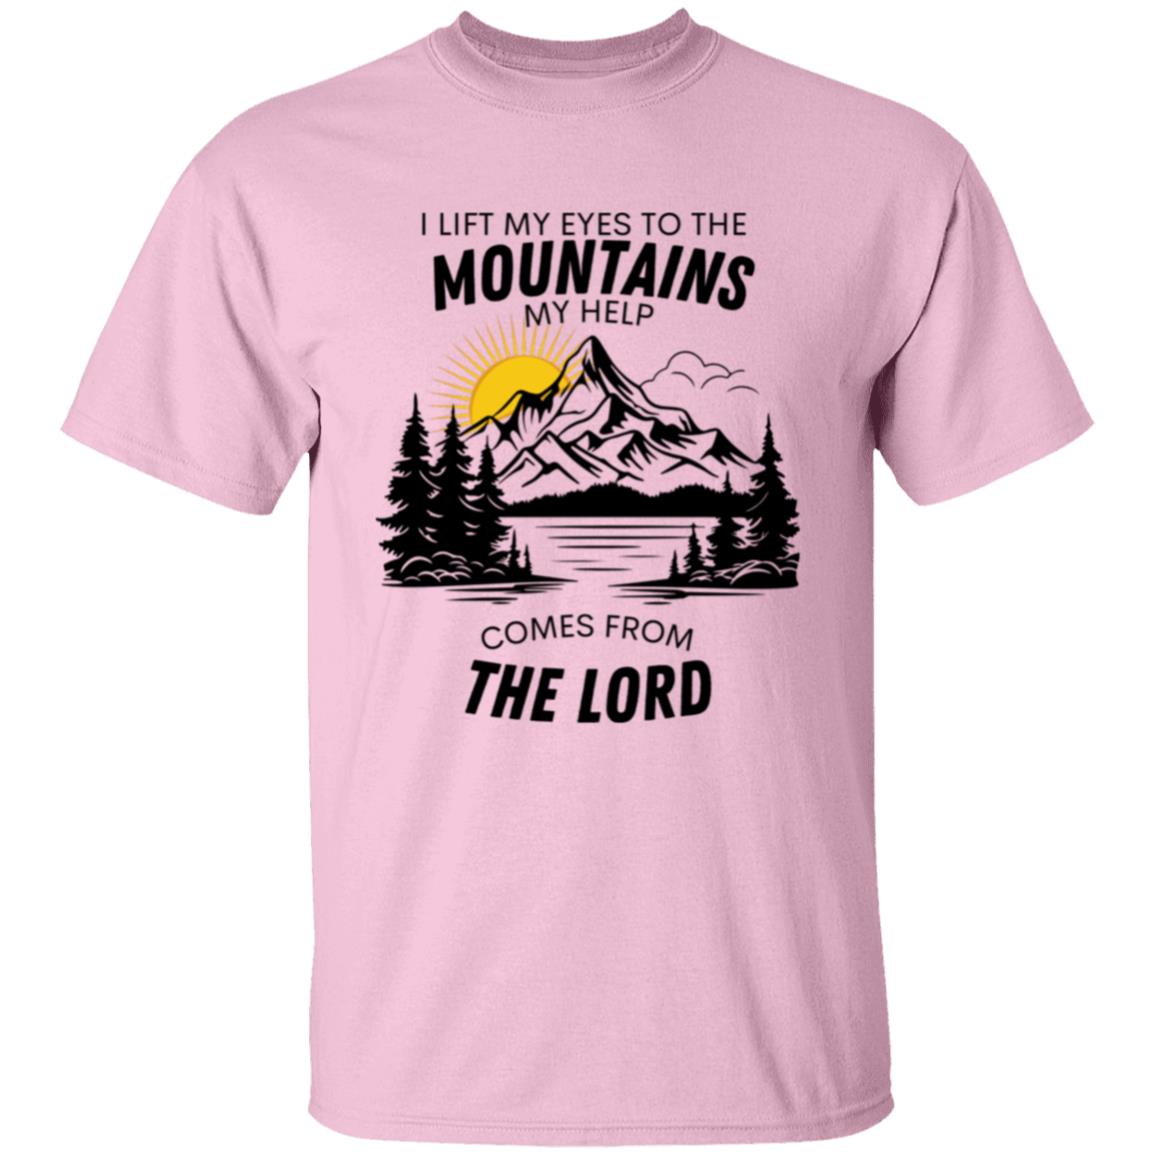 Get trendy with I LIFT MY EYES TO THE MOUNTIAINS I Lift My Eyes Up to the Mountains T shirt - Apparel available at Good Gift Company. Grab yours for $10.95 today!